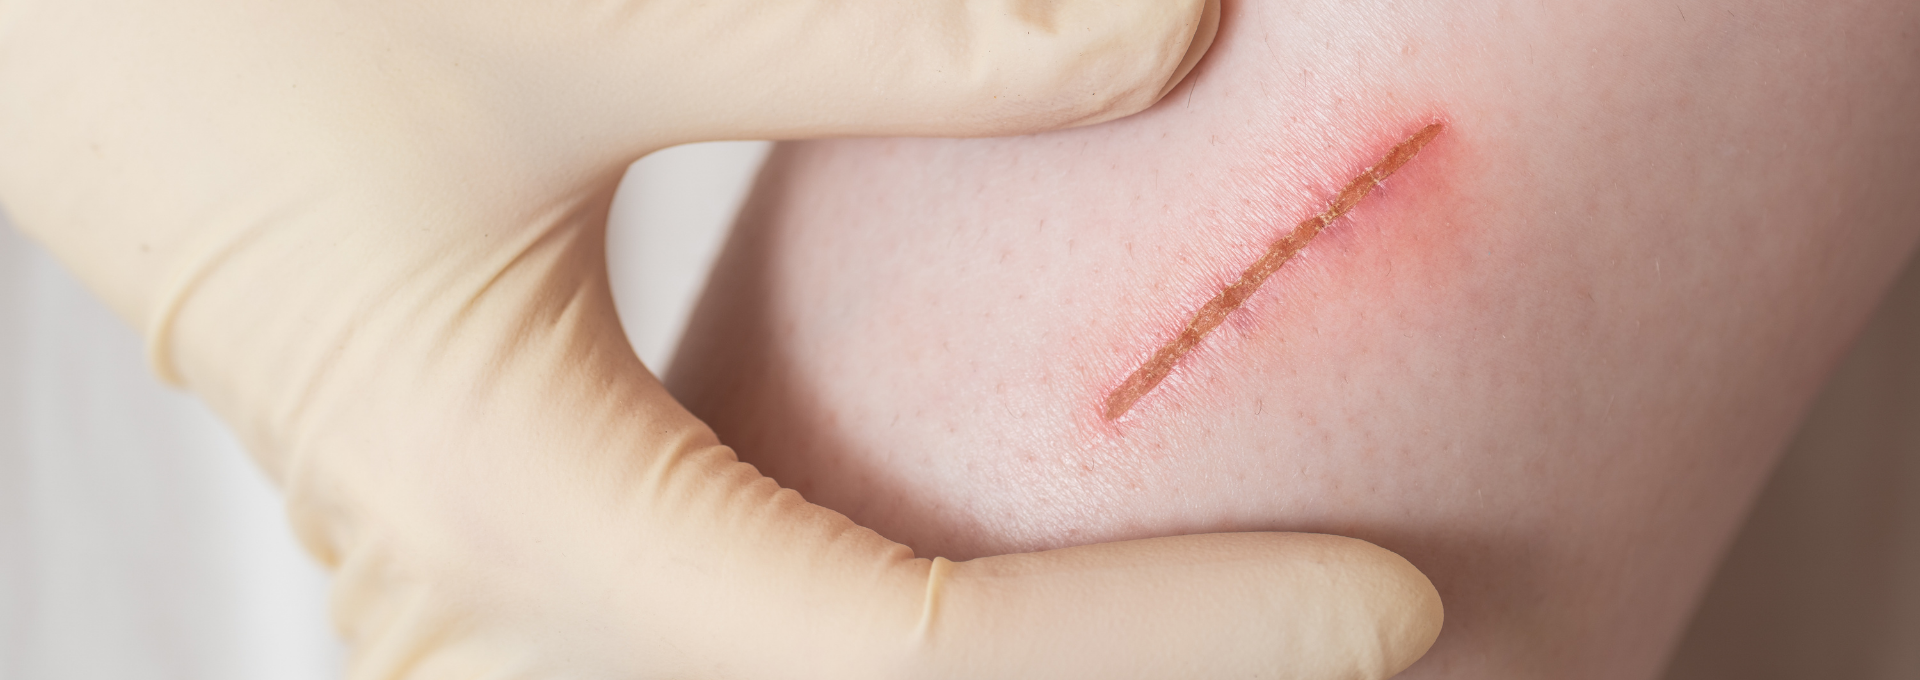 Slider: suture-free wound closure category